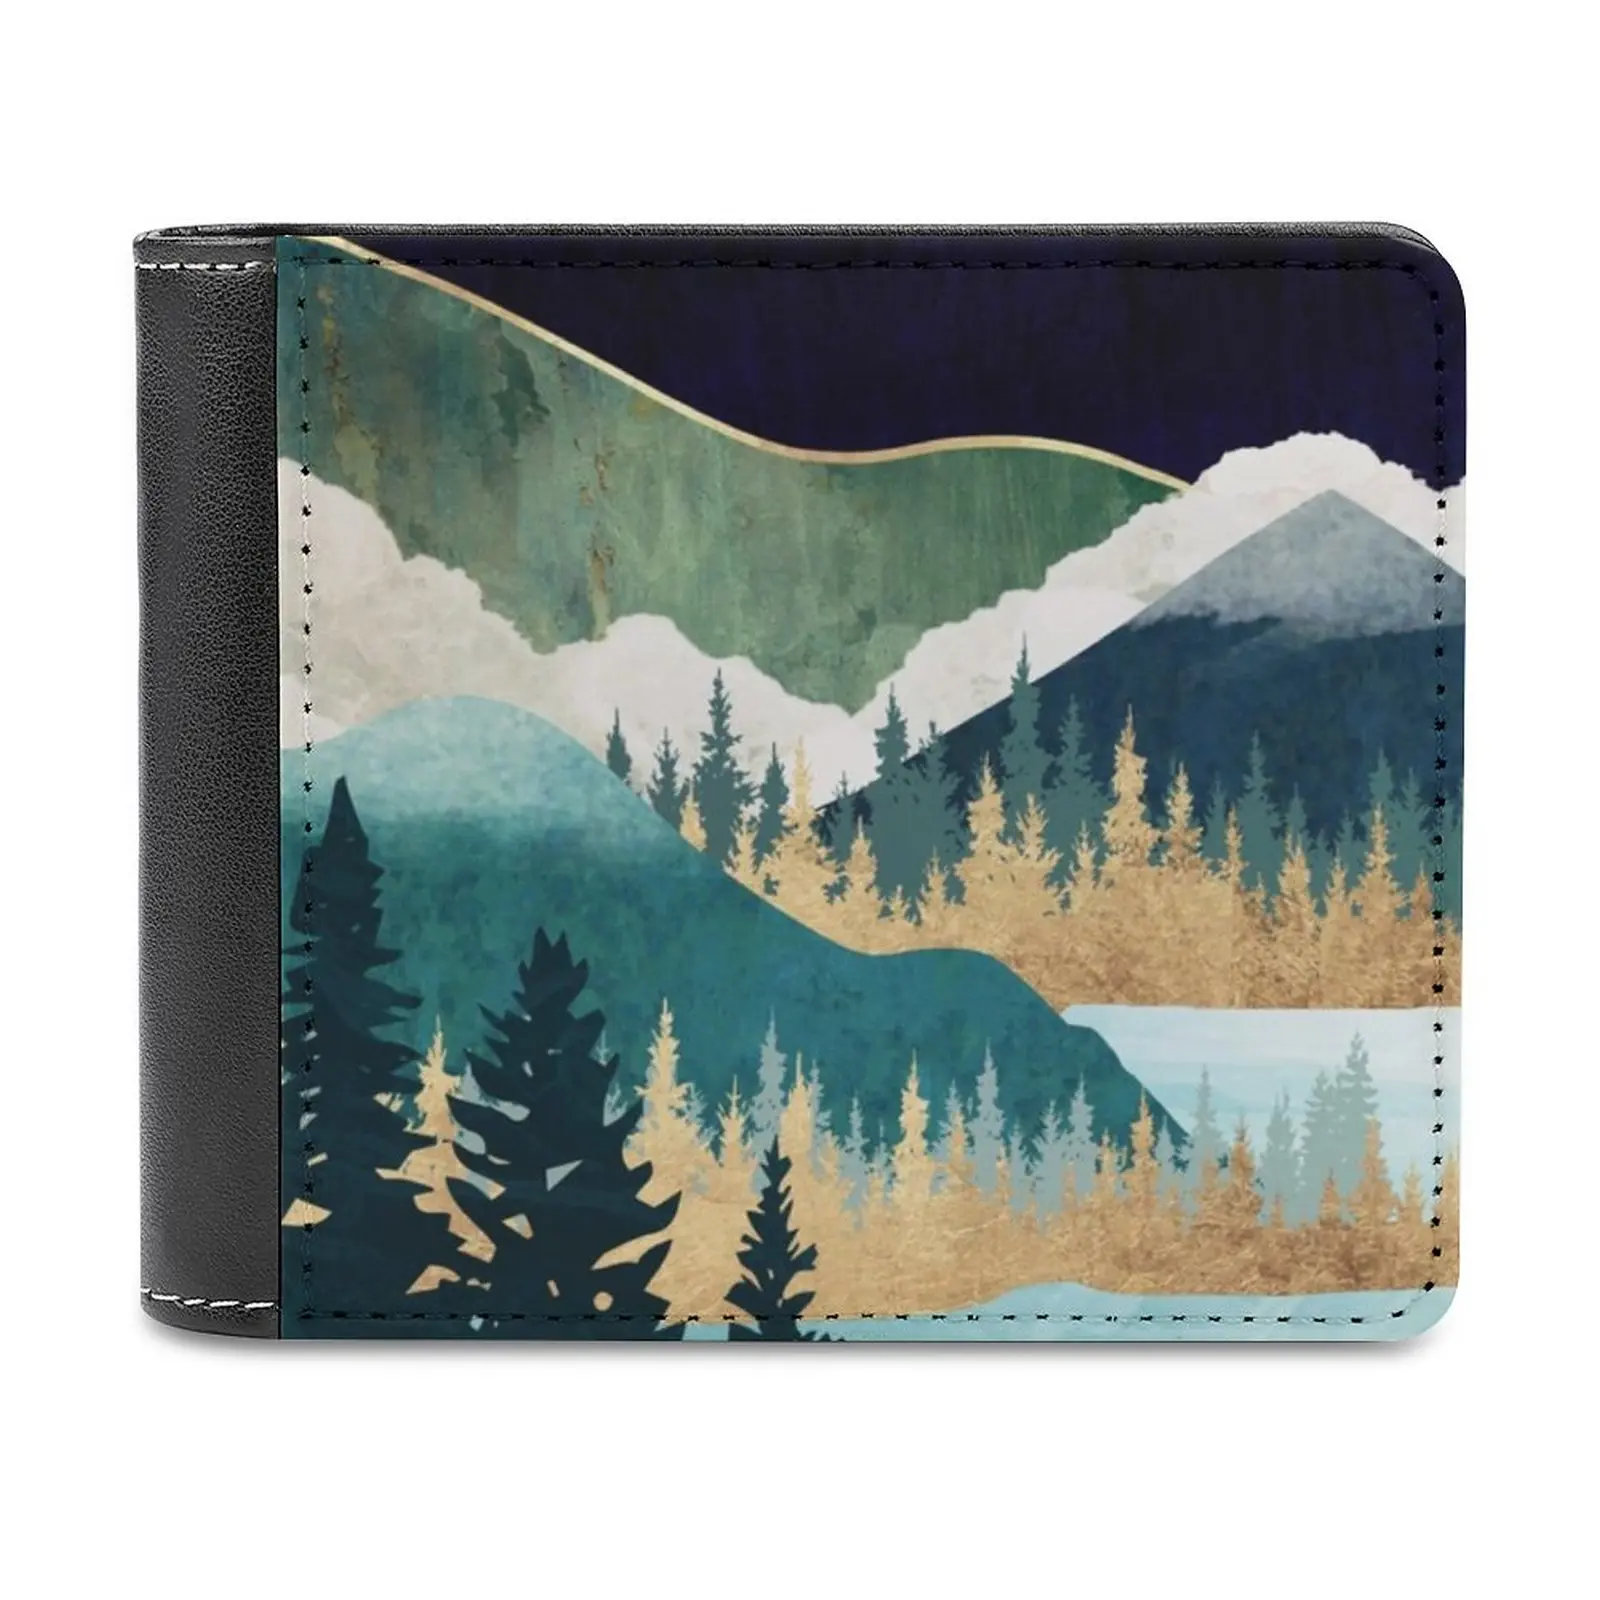 

Star Lake Leather Wallet Credit Card Holder Luxury Wallet Stars Lake Water Nature Landscape Mountains Forest Trees Blue